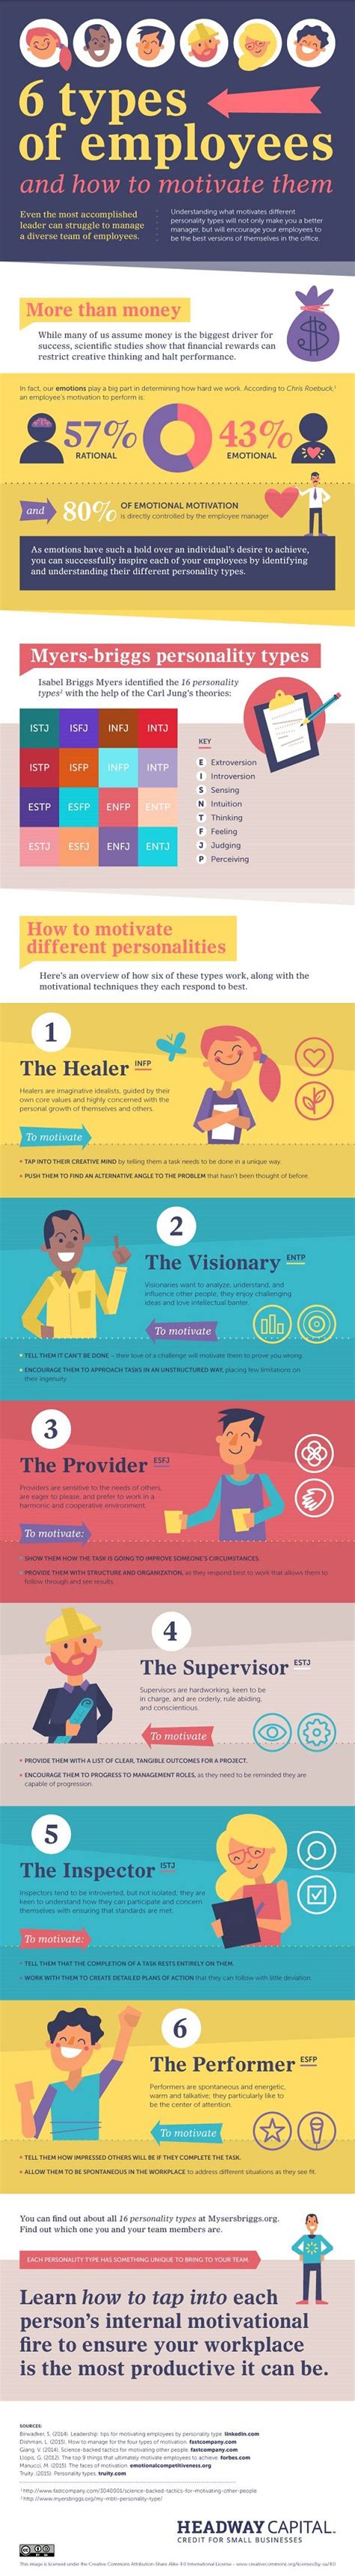 Infographic How To Motivate Employees With Different